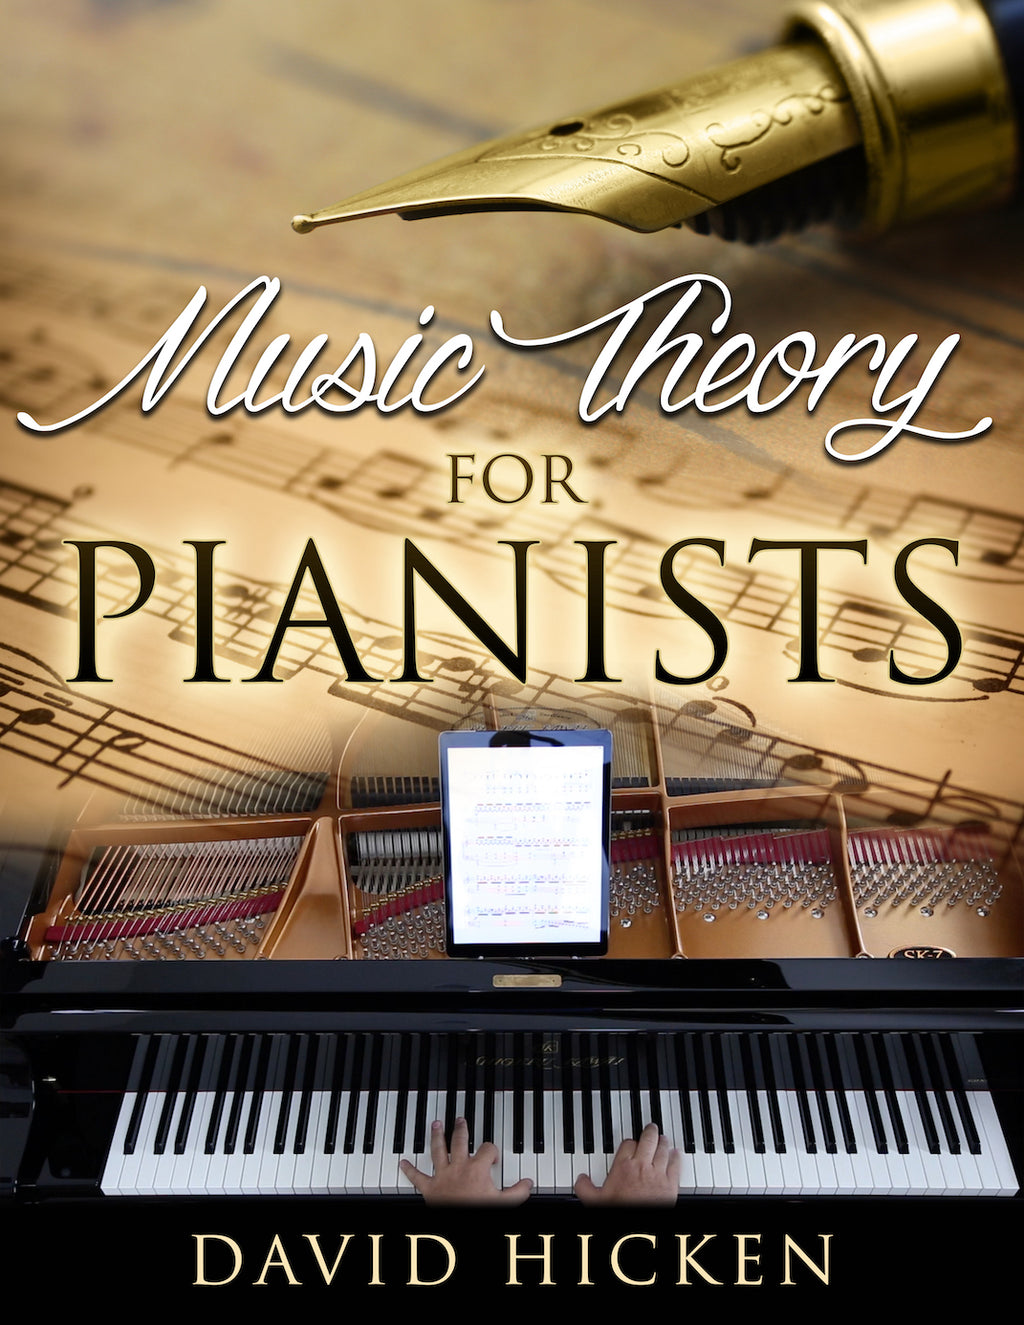 Music Theory For Pianists Book by David Hicken